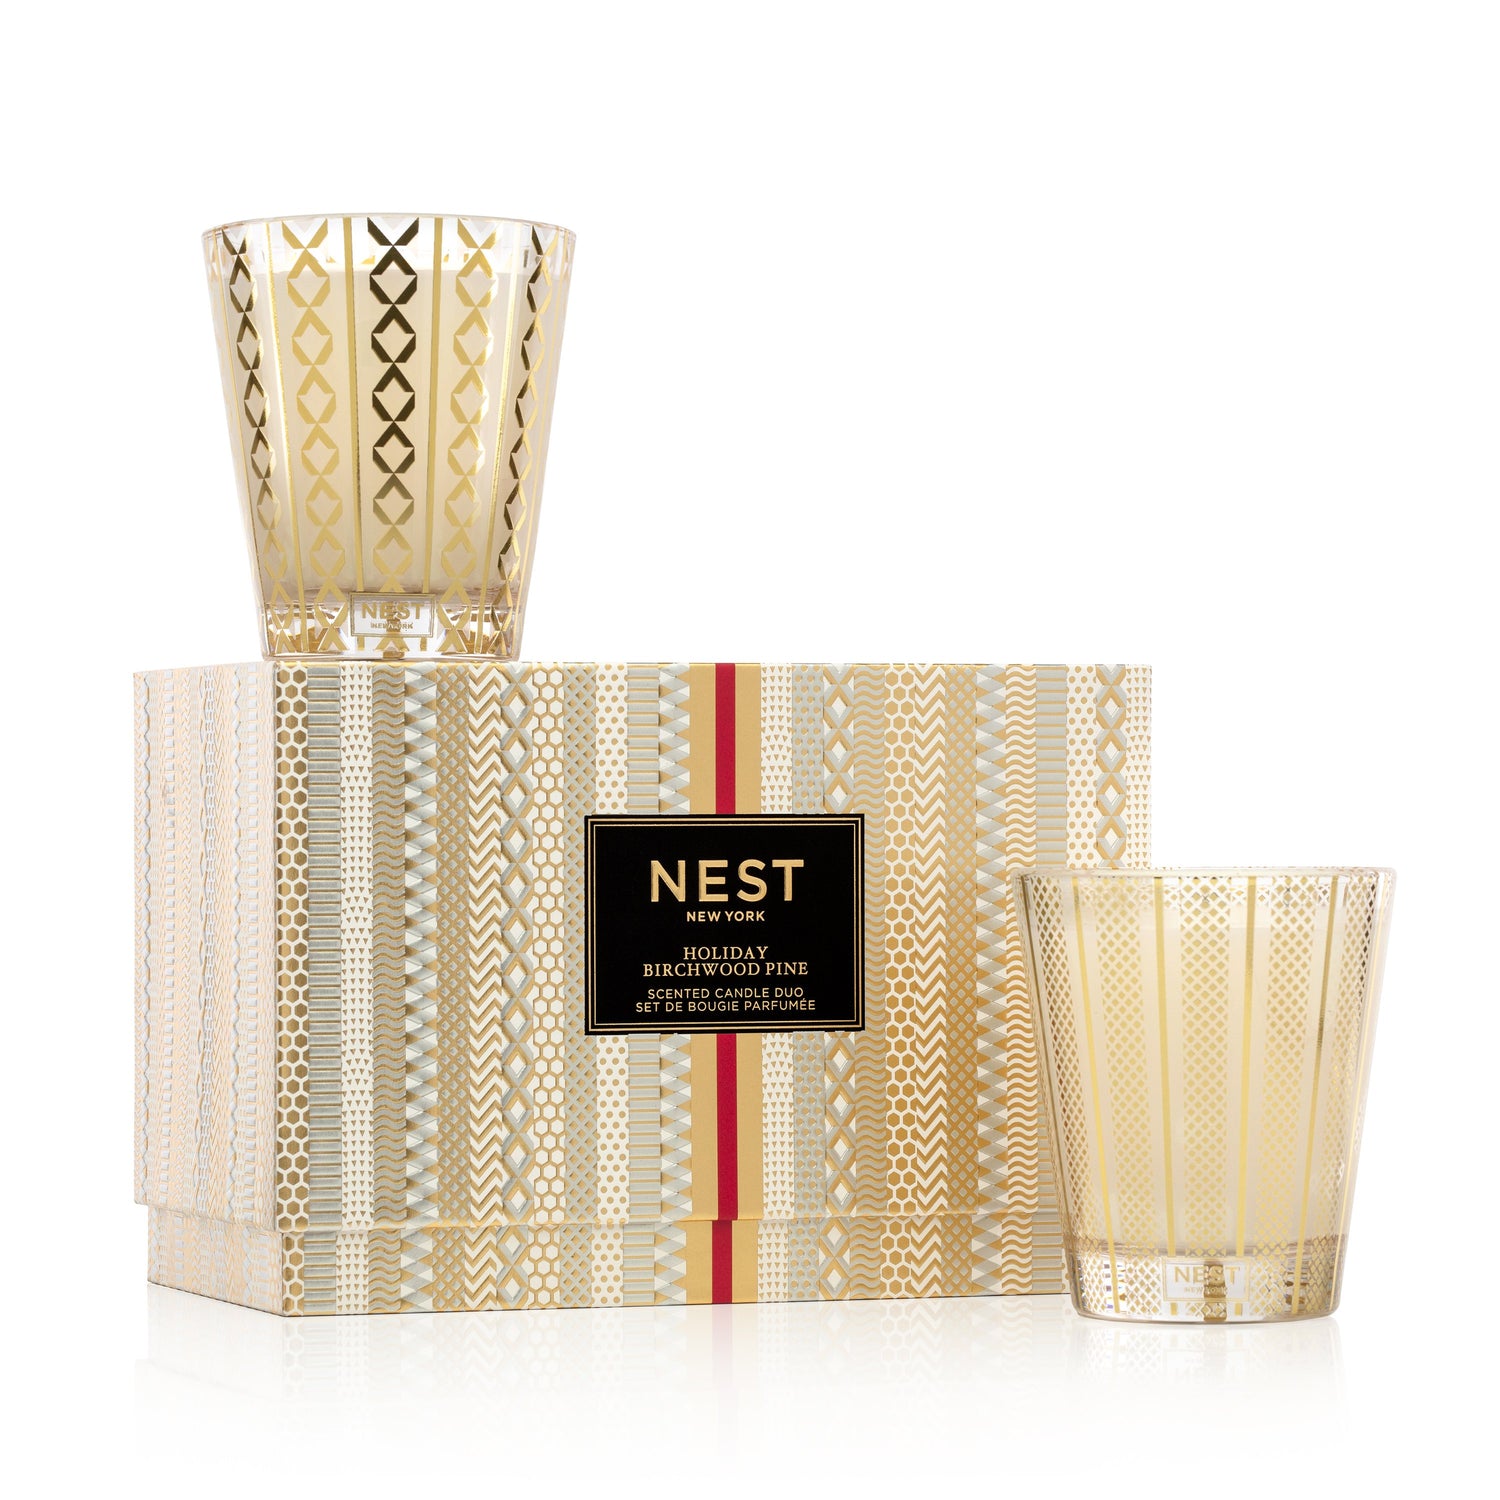 Nest Christmas Candle Duo Candles in Holiday/Birchwood Pine at Wrapsody